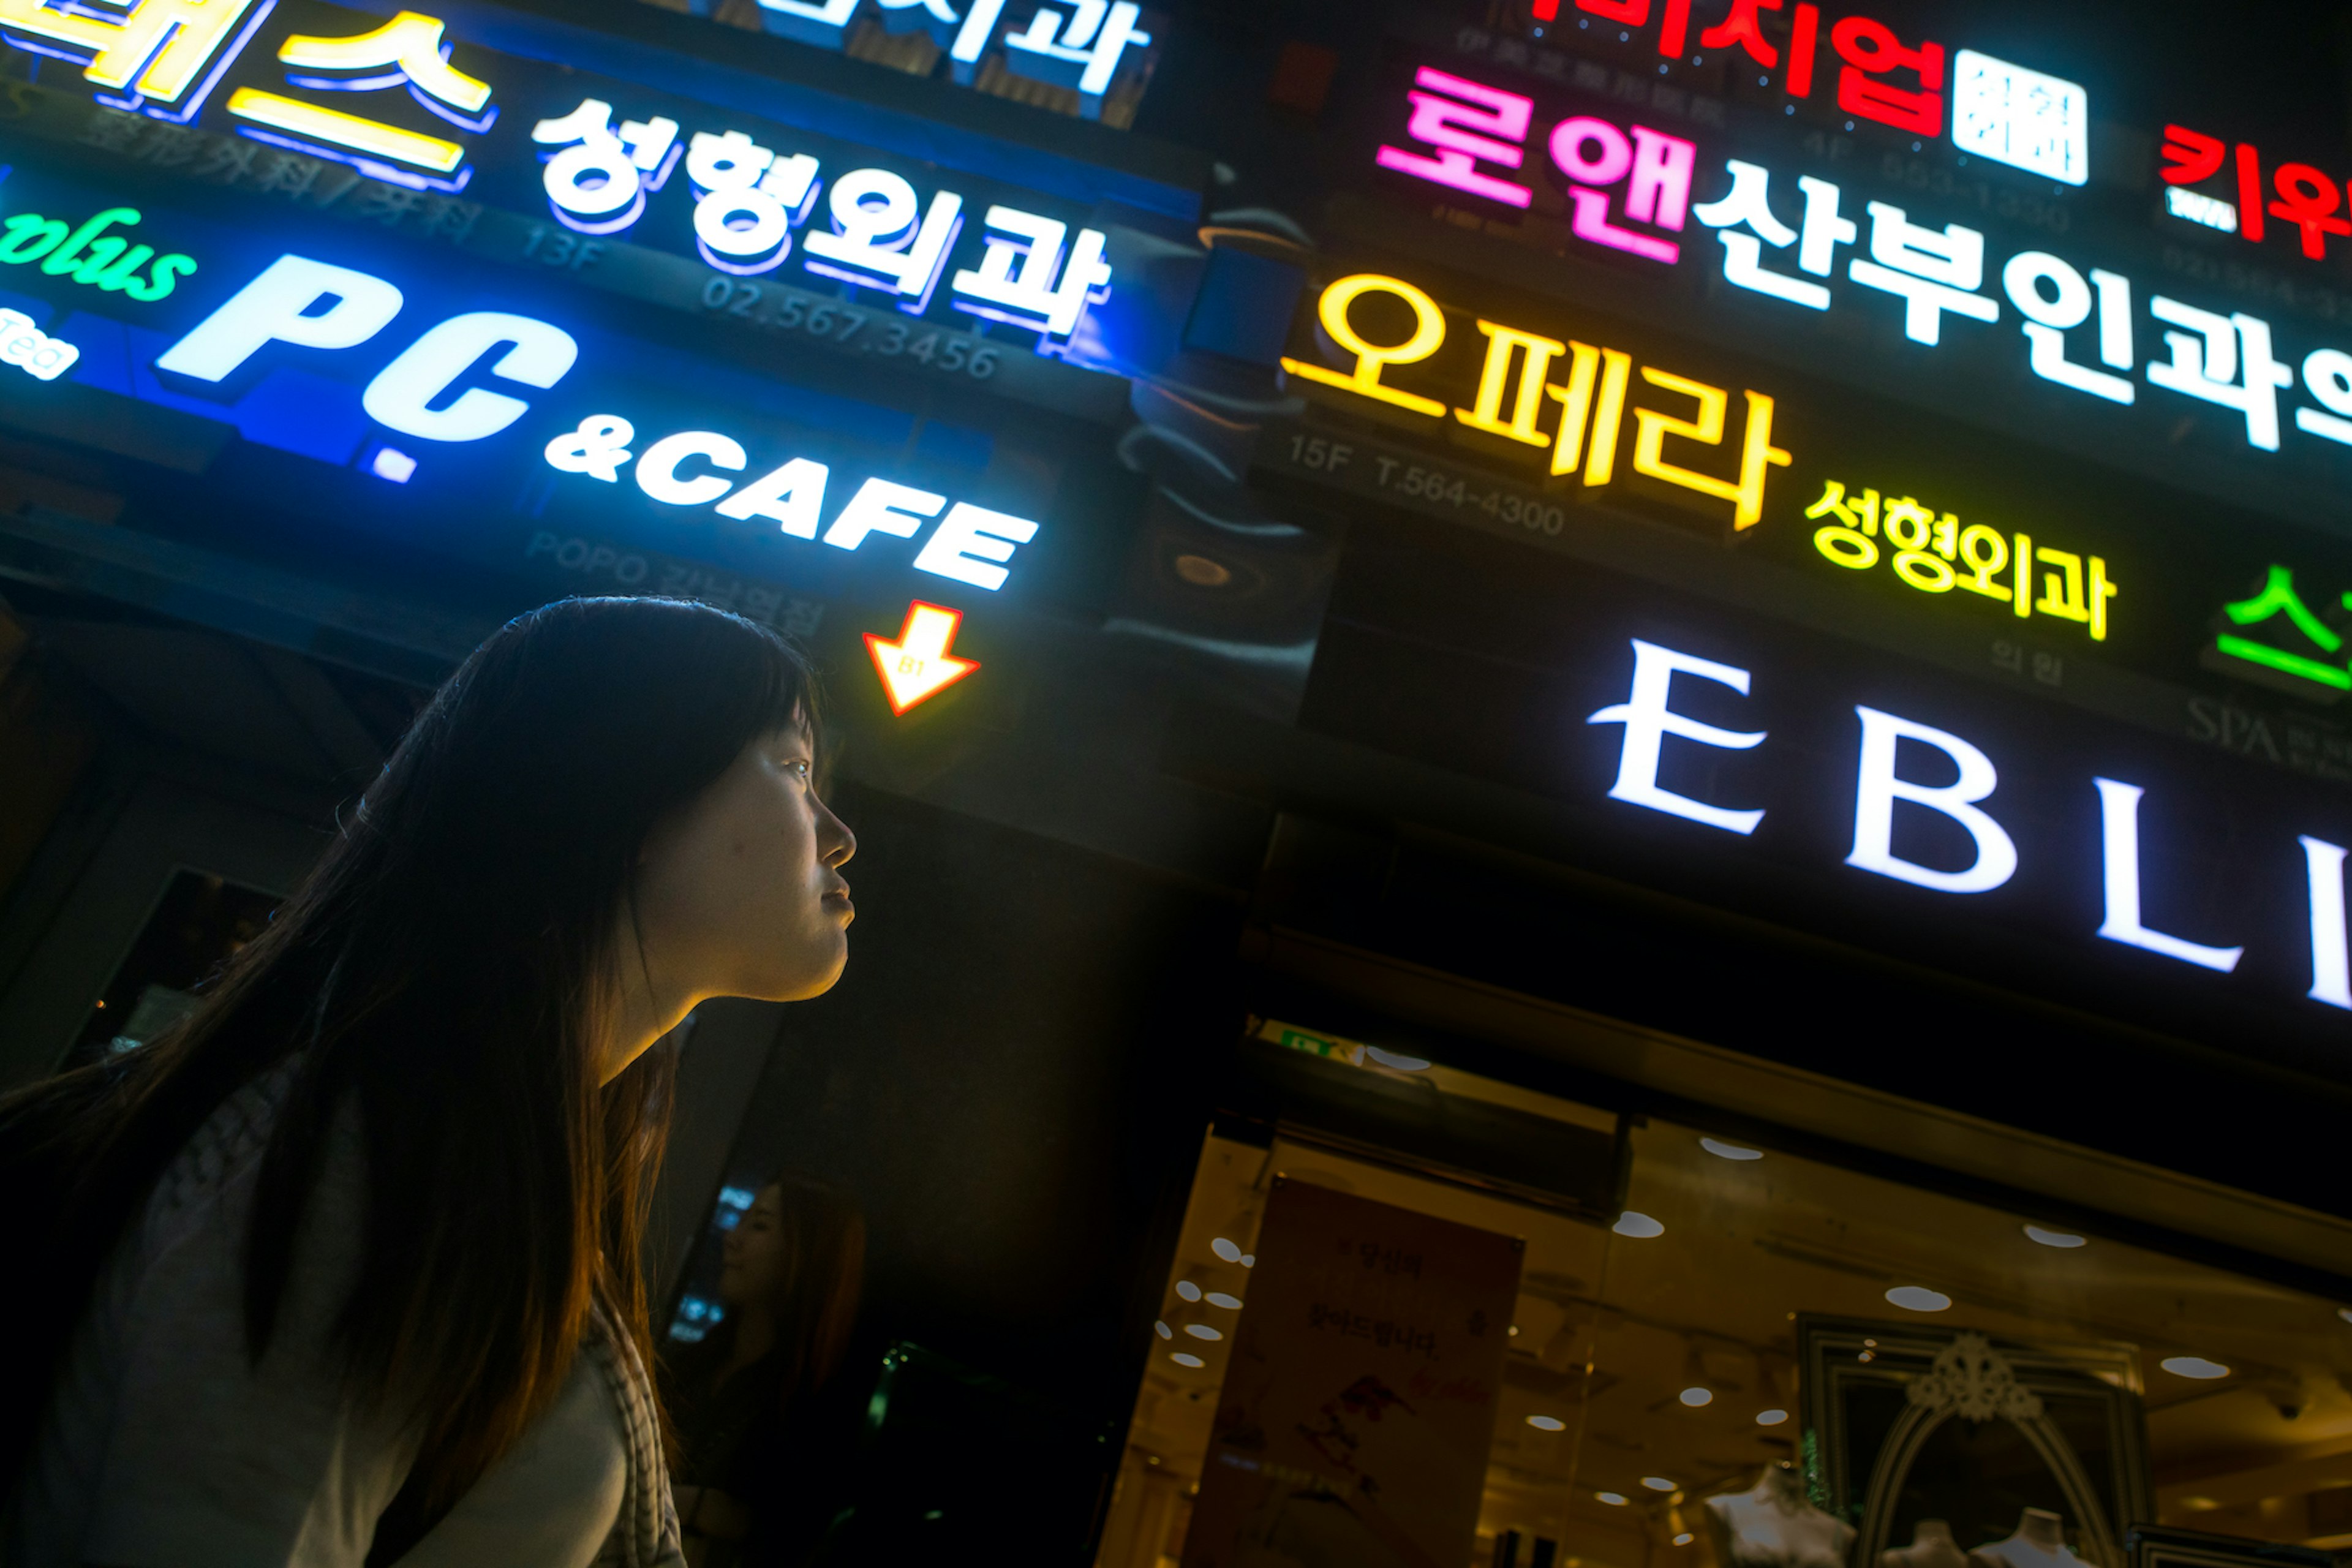 North korean teen defector in front of neon lights in the street, National capital area, Seoul, South korea